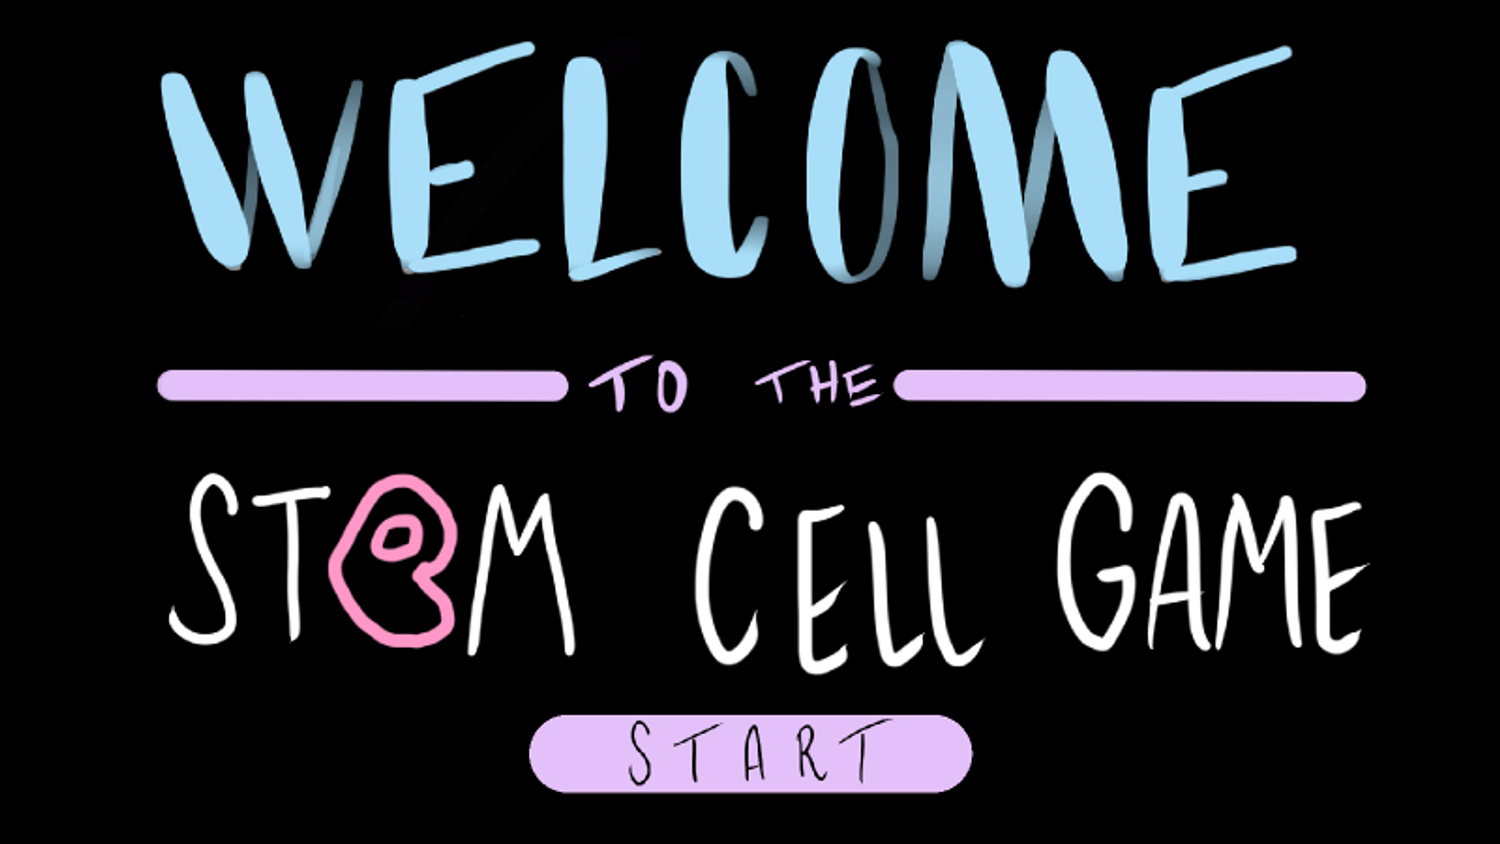 The Stem Cell Game!